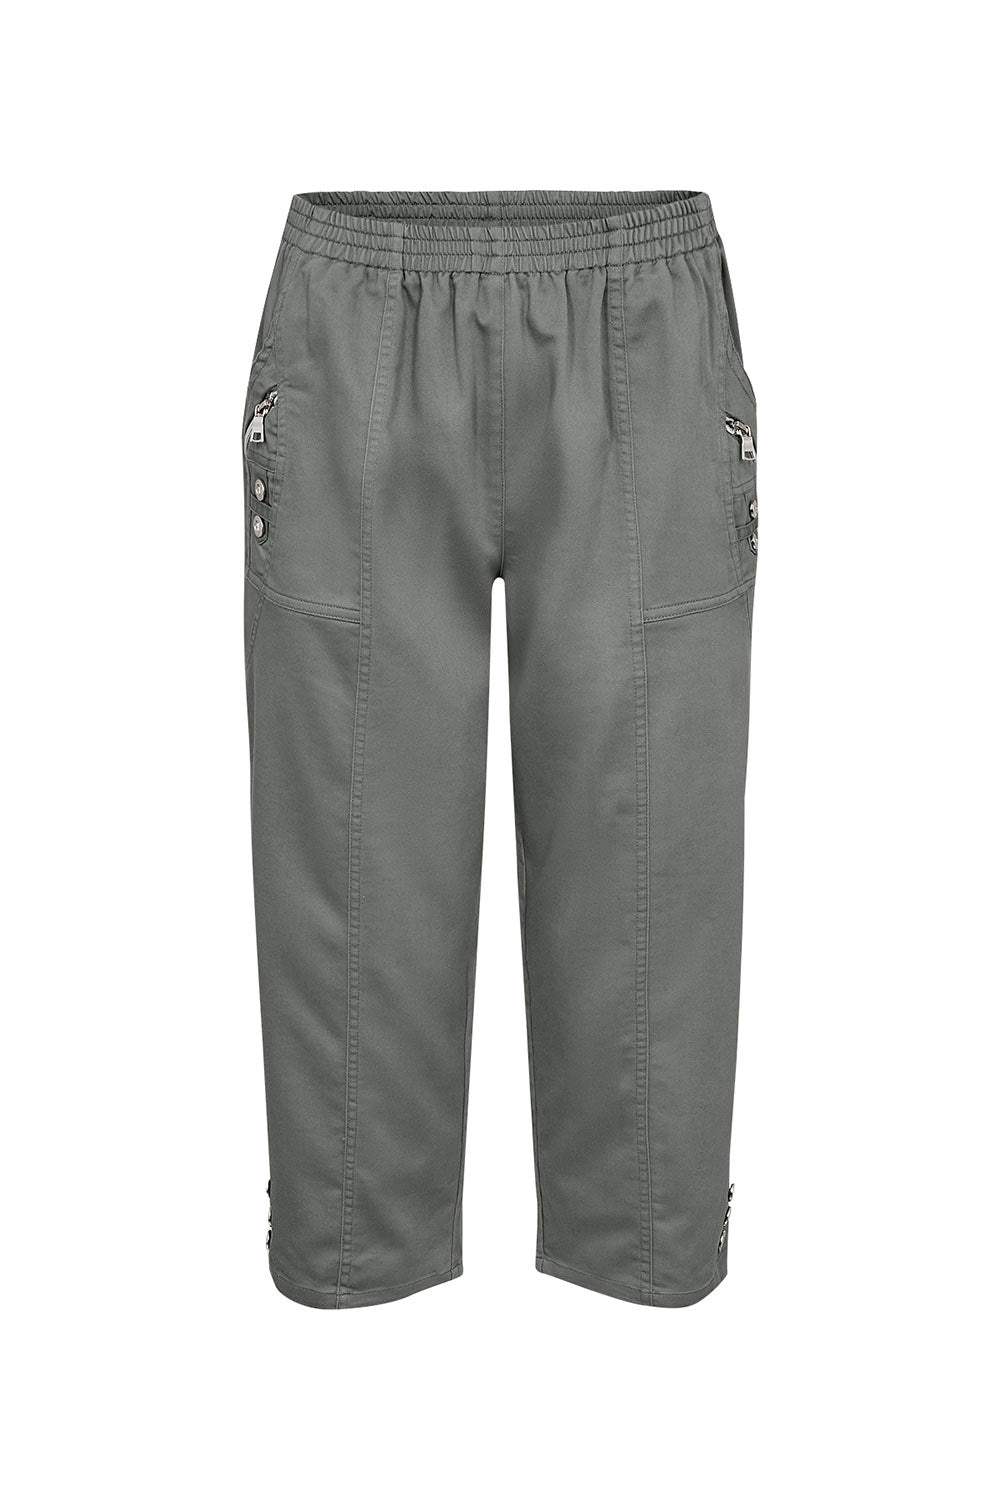 Soya Concept (17197) Women's Pull On Capris Pants With Button & Zipper Detail and Pockets in Misty Green